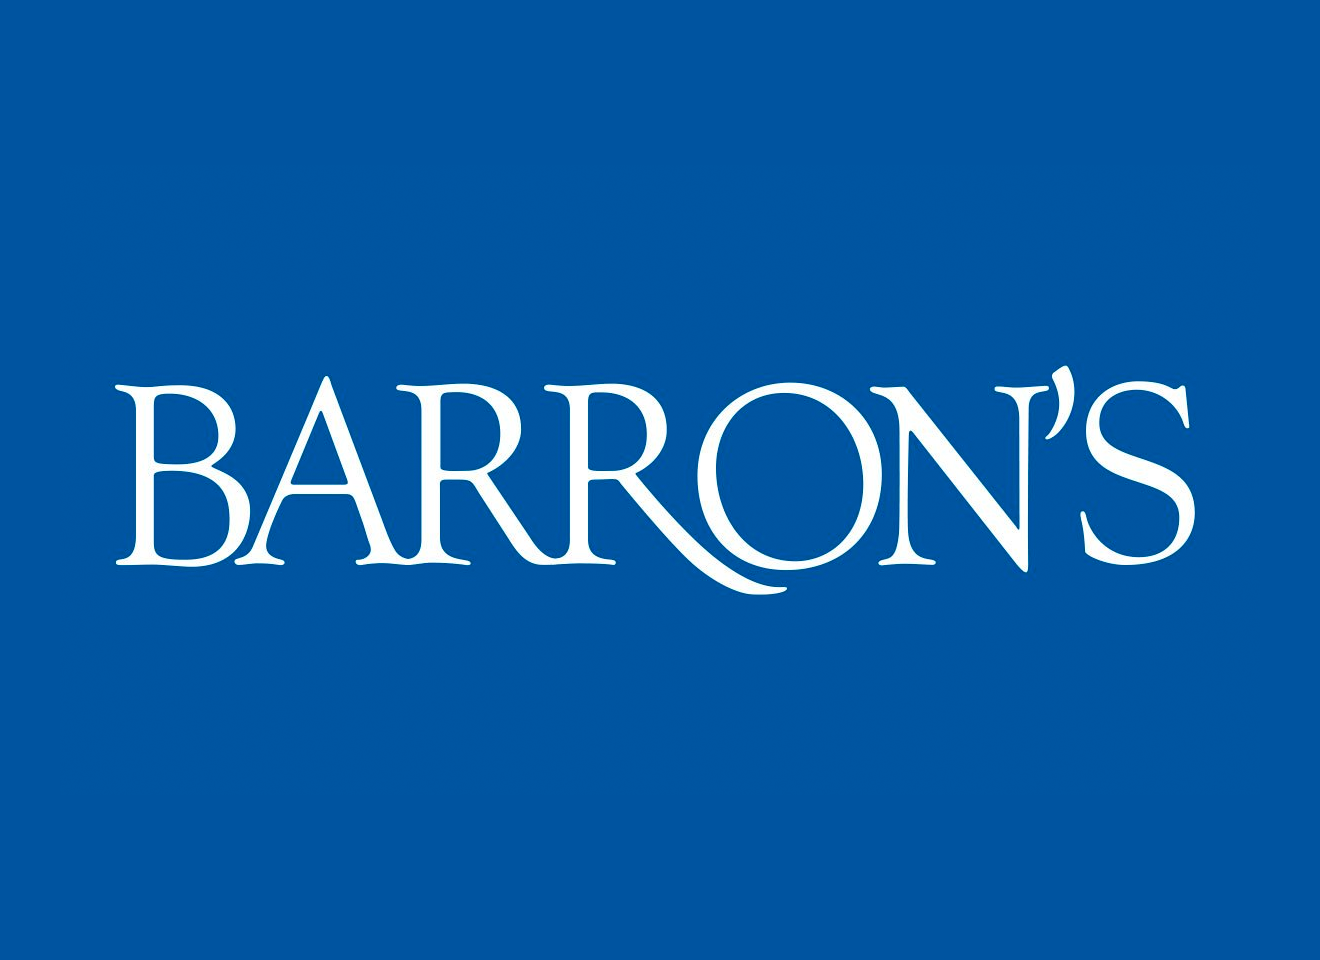 Ted Cronin Ranks 8th in Barron’s 2022 Top 100 Independent Financial Advisors Ranking